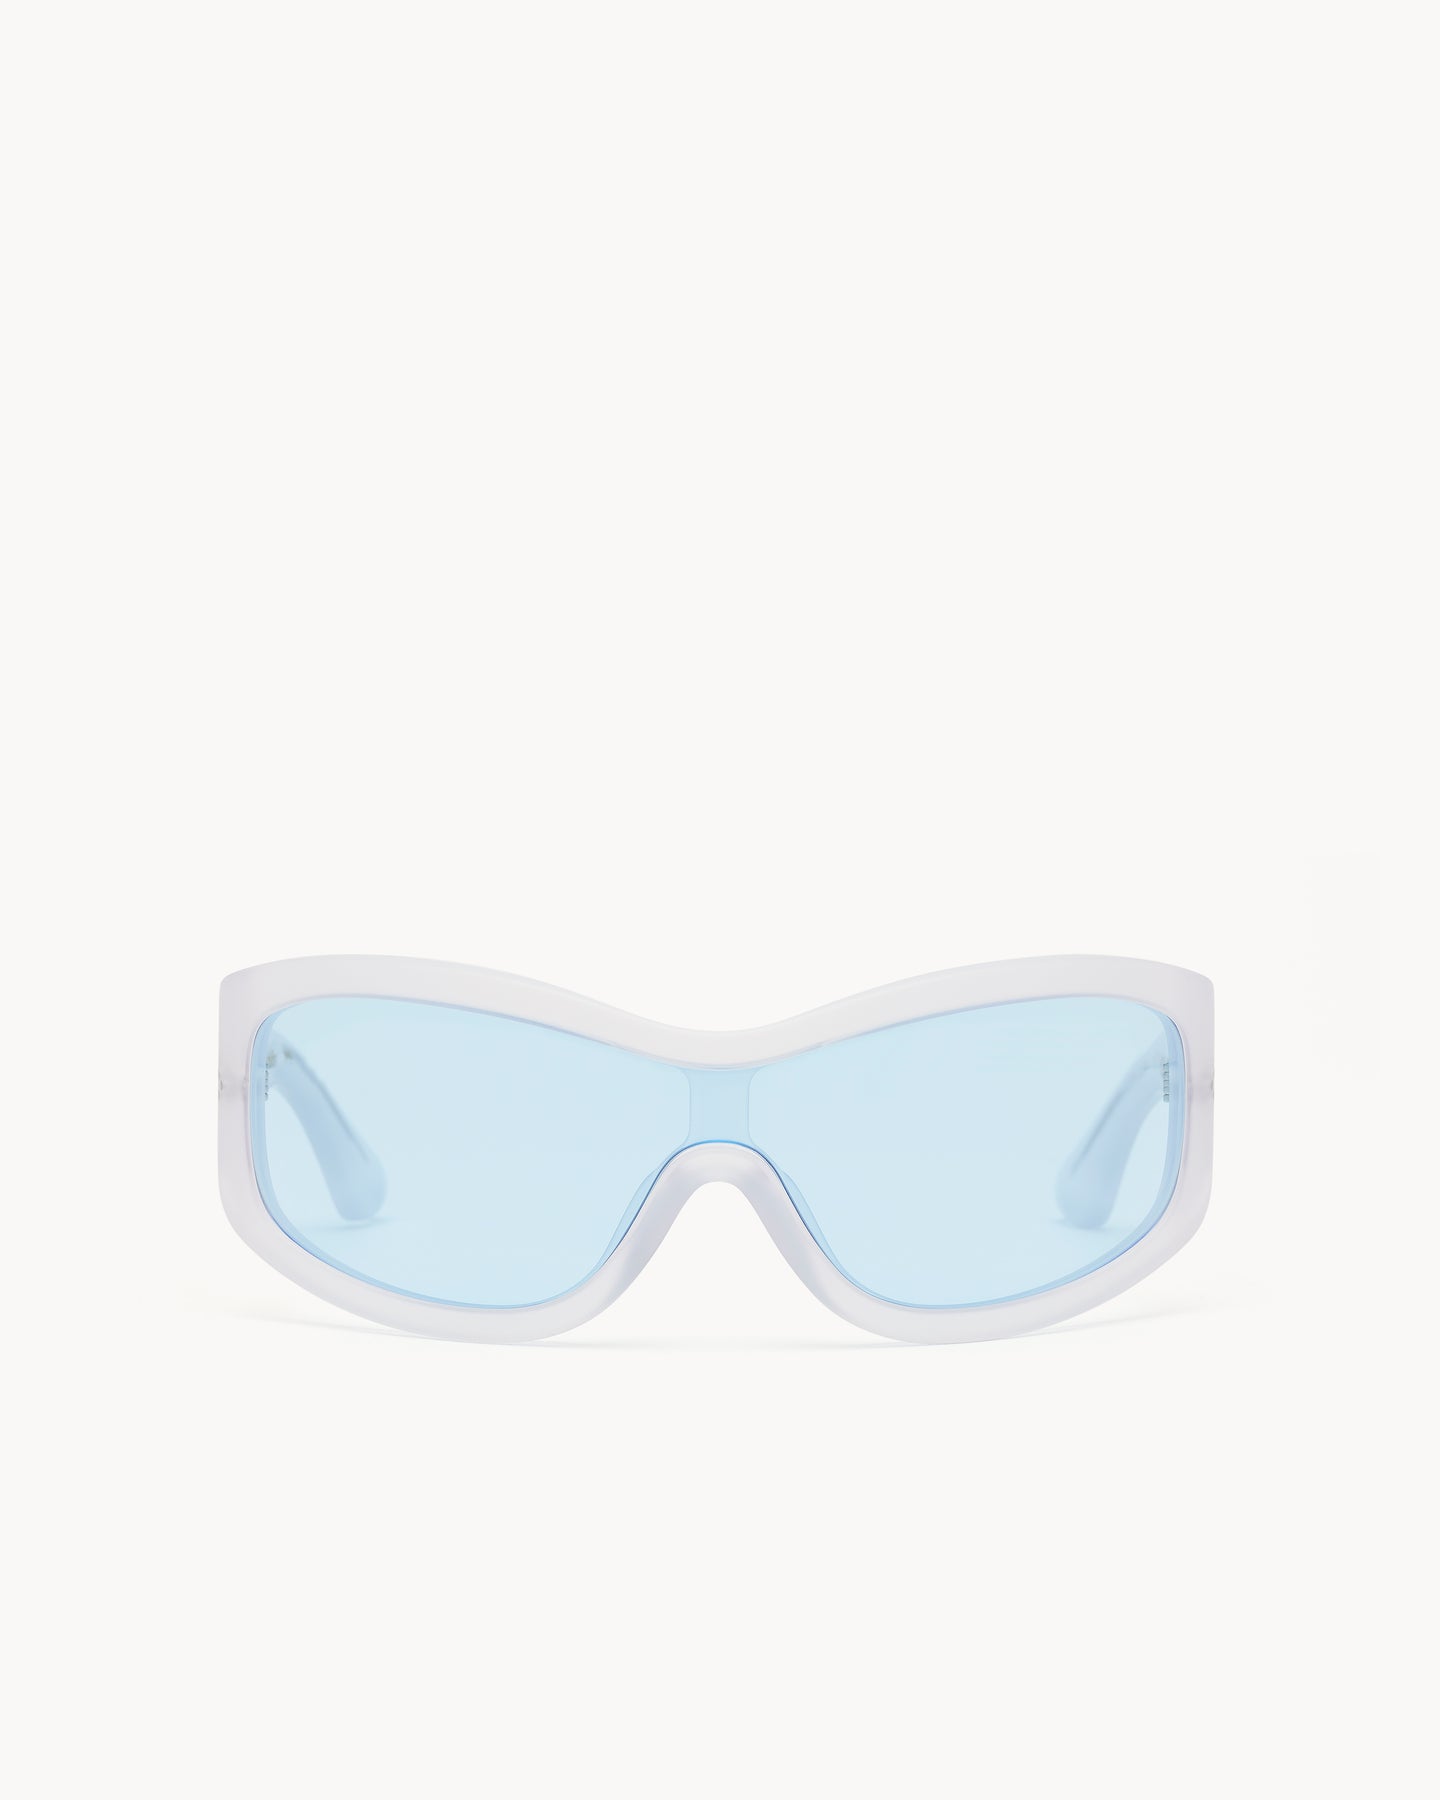 Port Tanger Nunny Sunglasses in Frosty Blue Acetate and Rif Blue Lenses 1